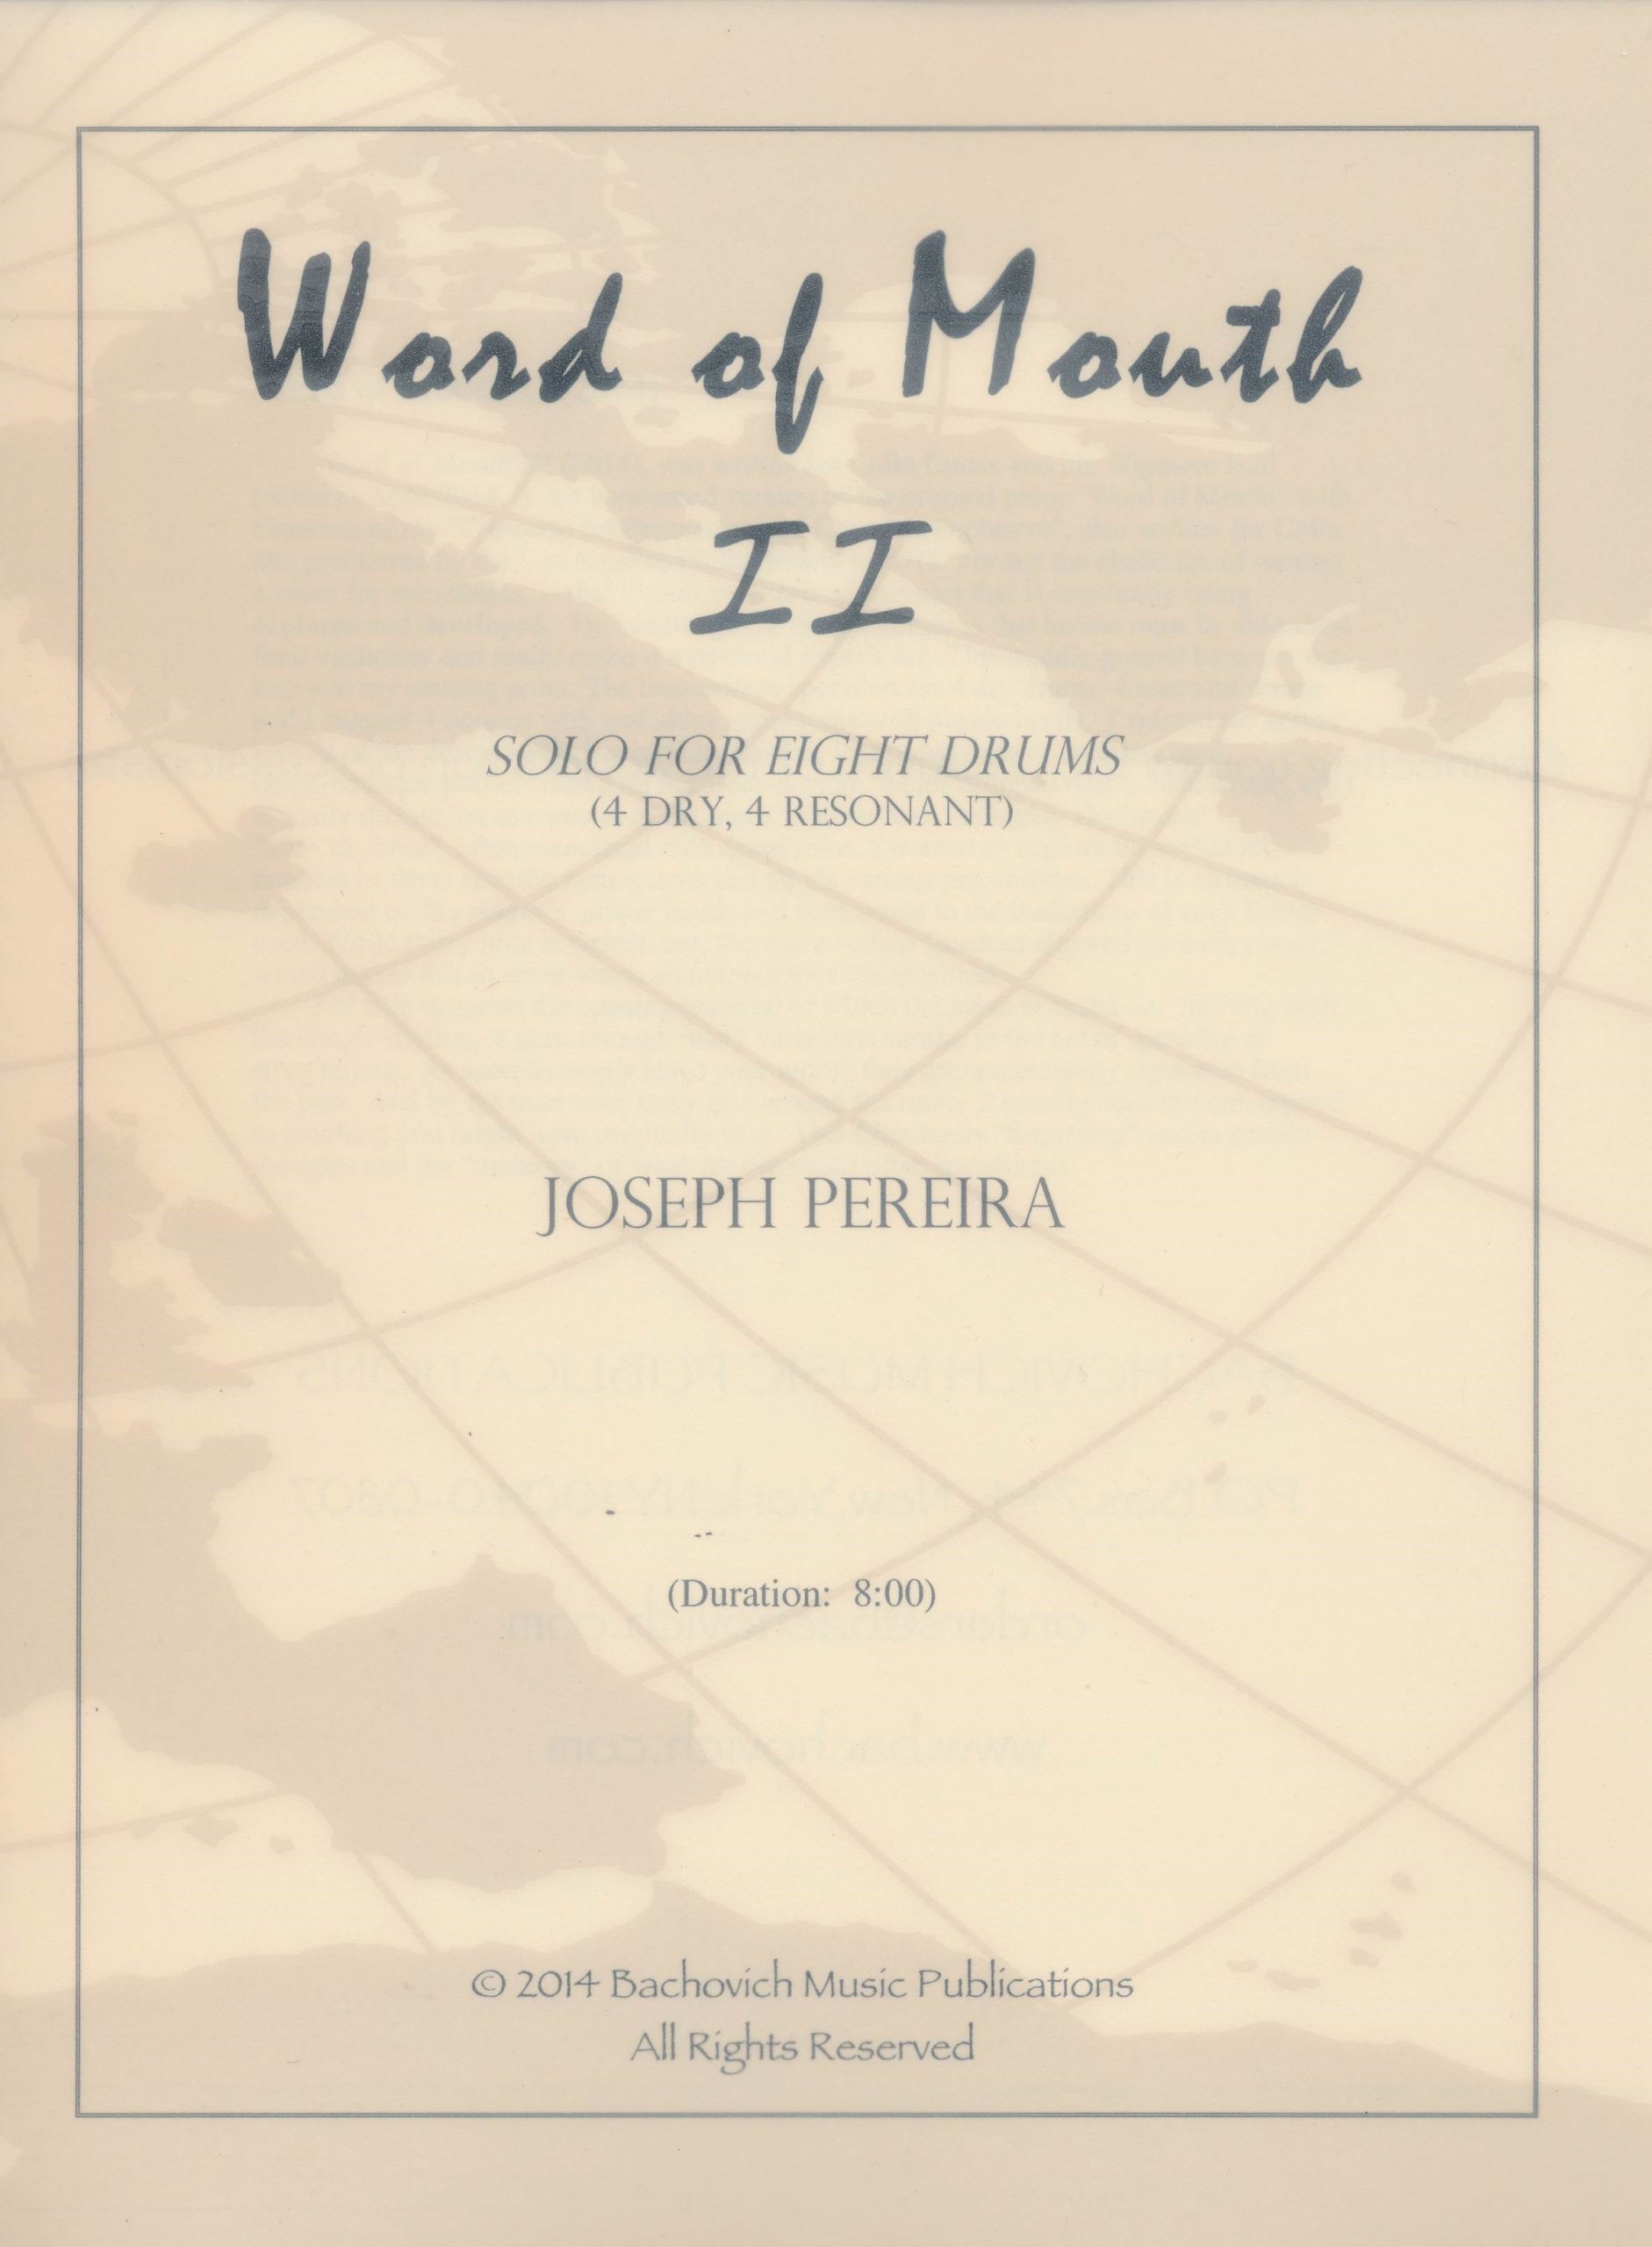 Word of Mouth II by Joseph Pereira